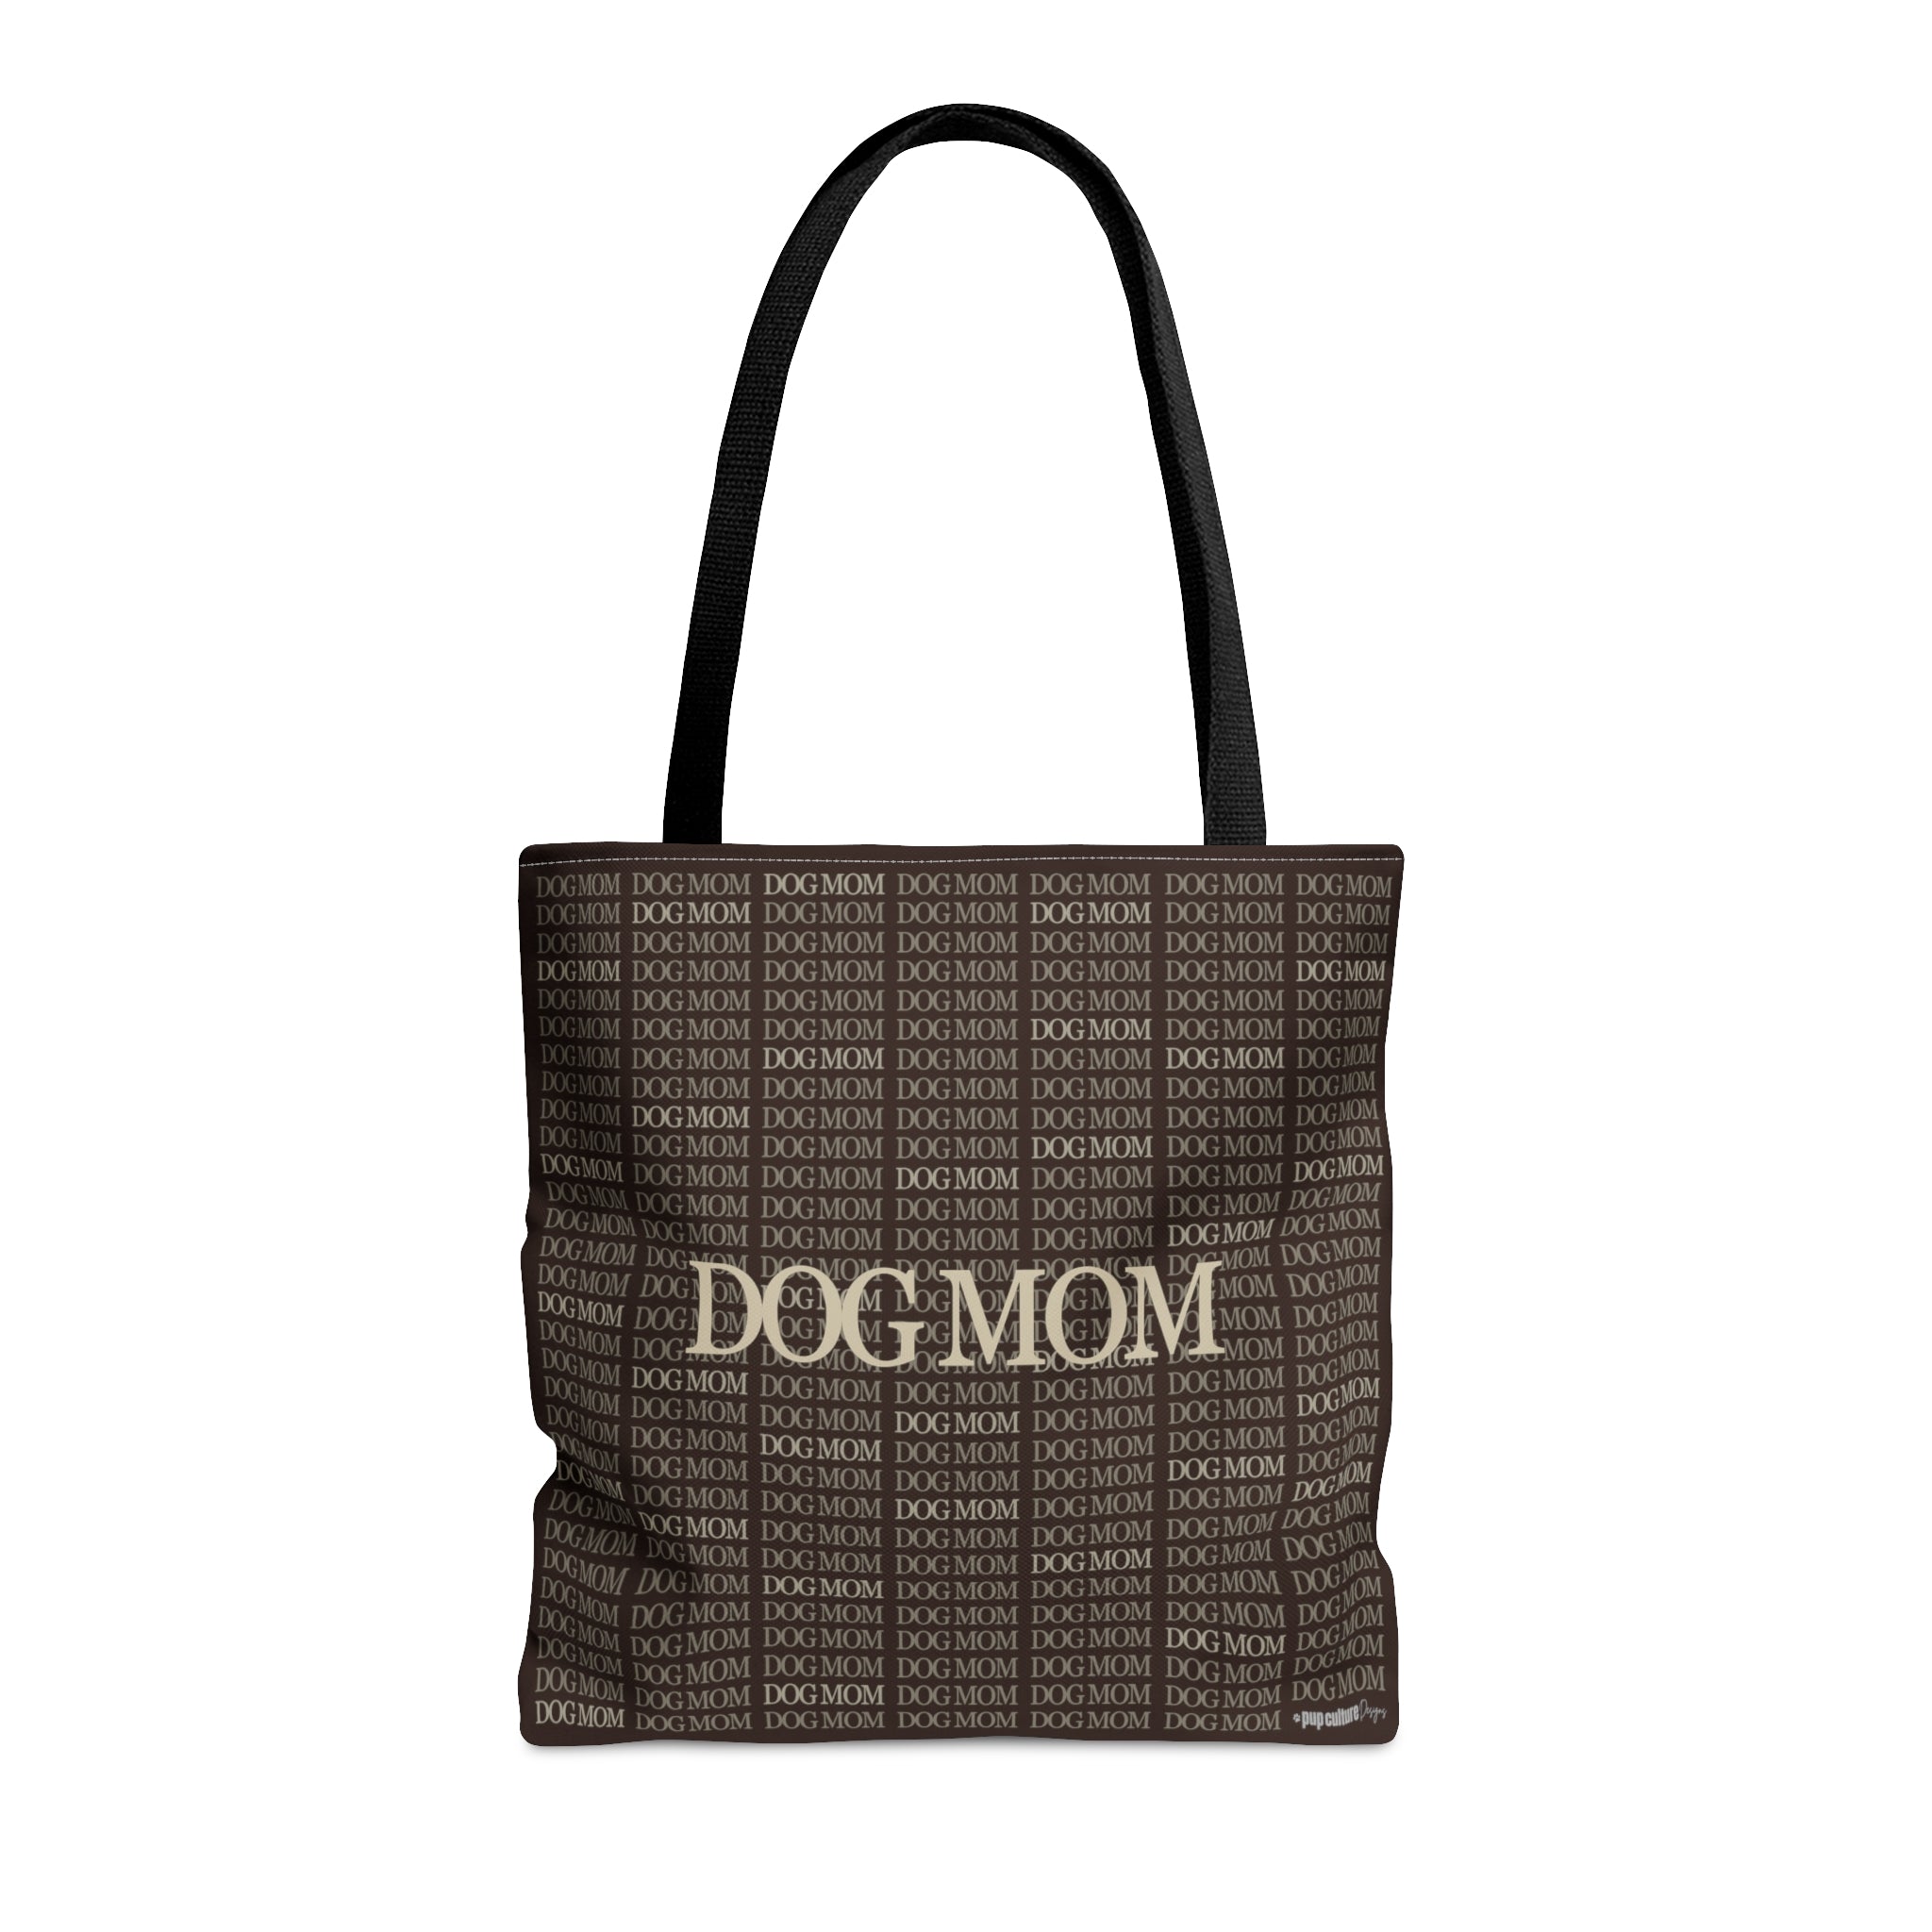 DOG MOM Stylized Fancy Text Signature Pattern Tote Bag - dog-mom-stylized-fancy-text-signature-pattern-tote-bag